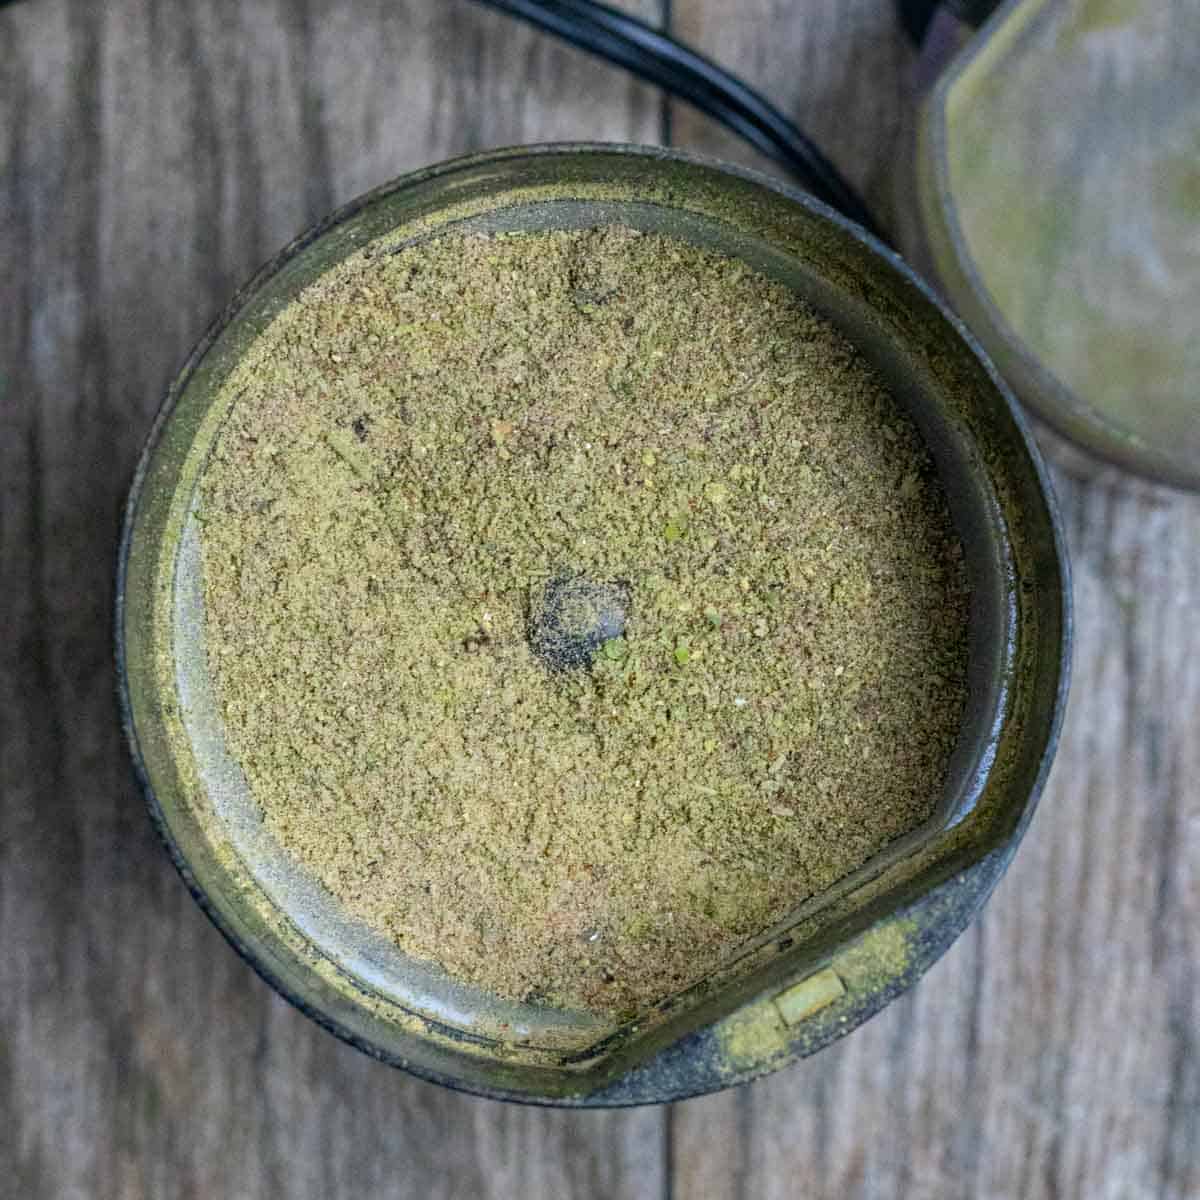 All purpose seasoning blend in spice grinder after grinding.